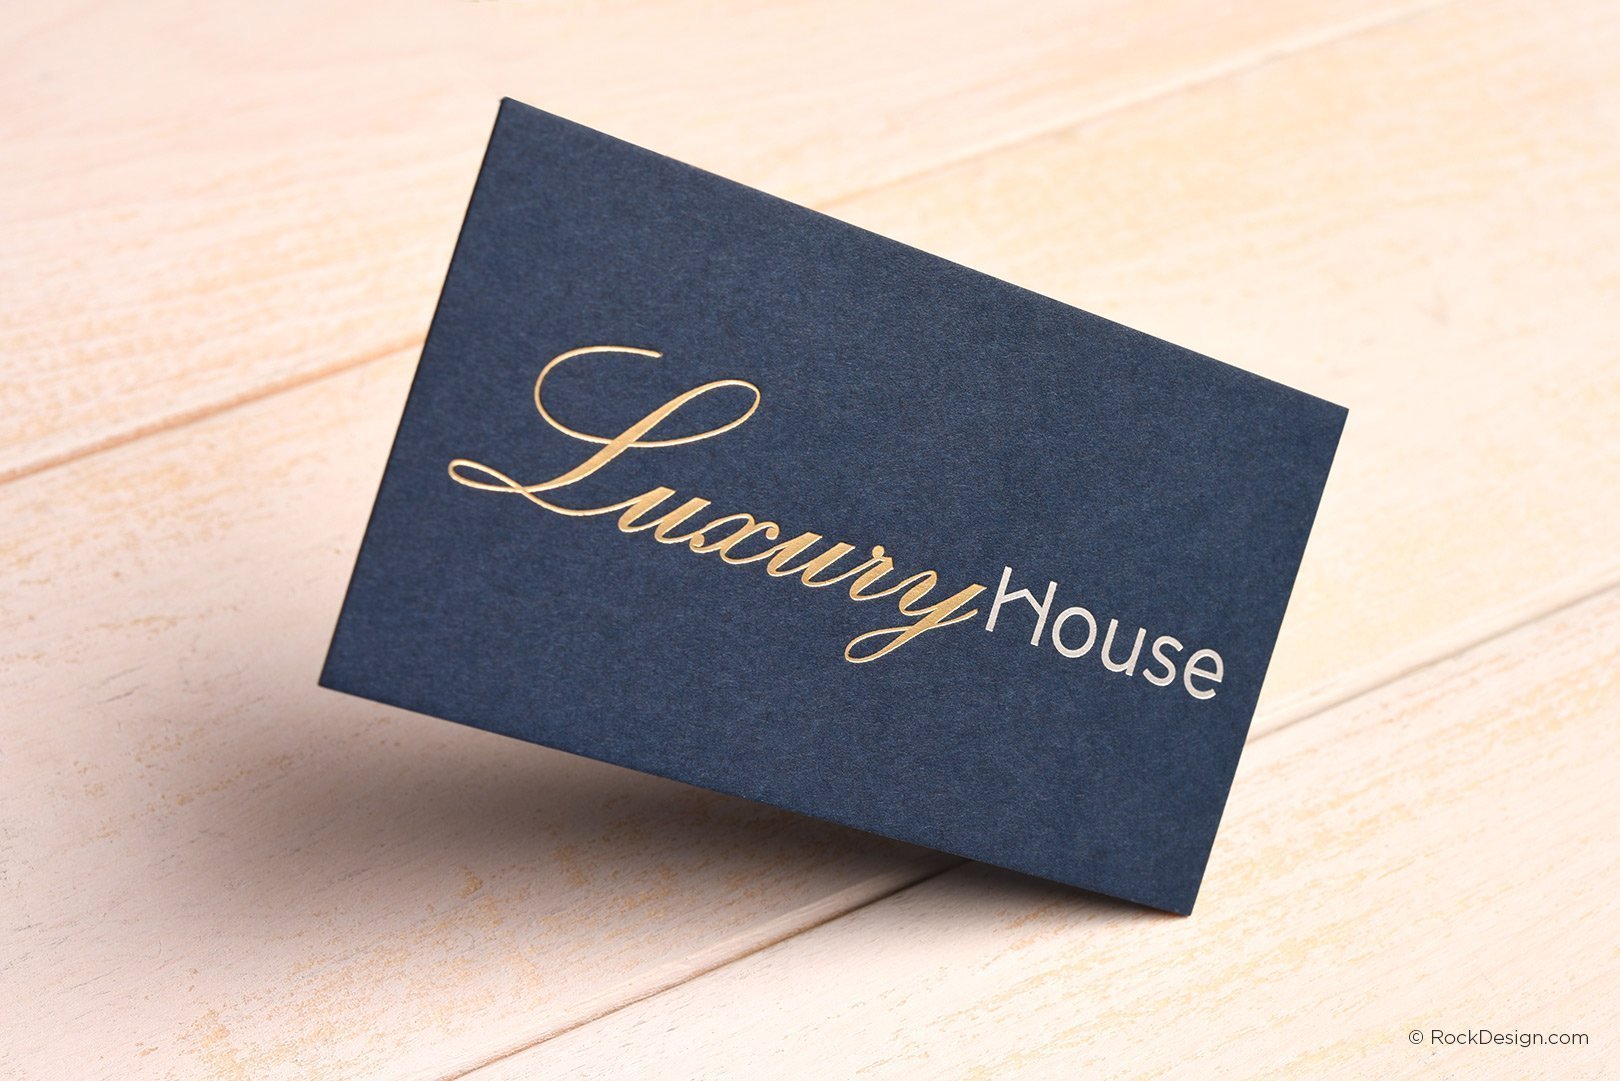 Luxury Base - We now offer personalised hot stamping of